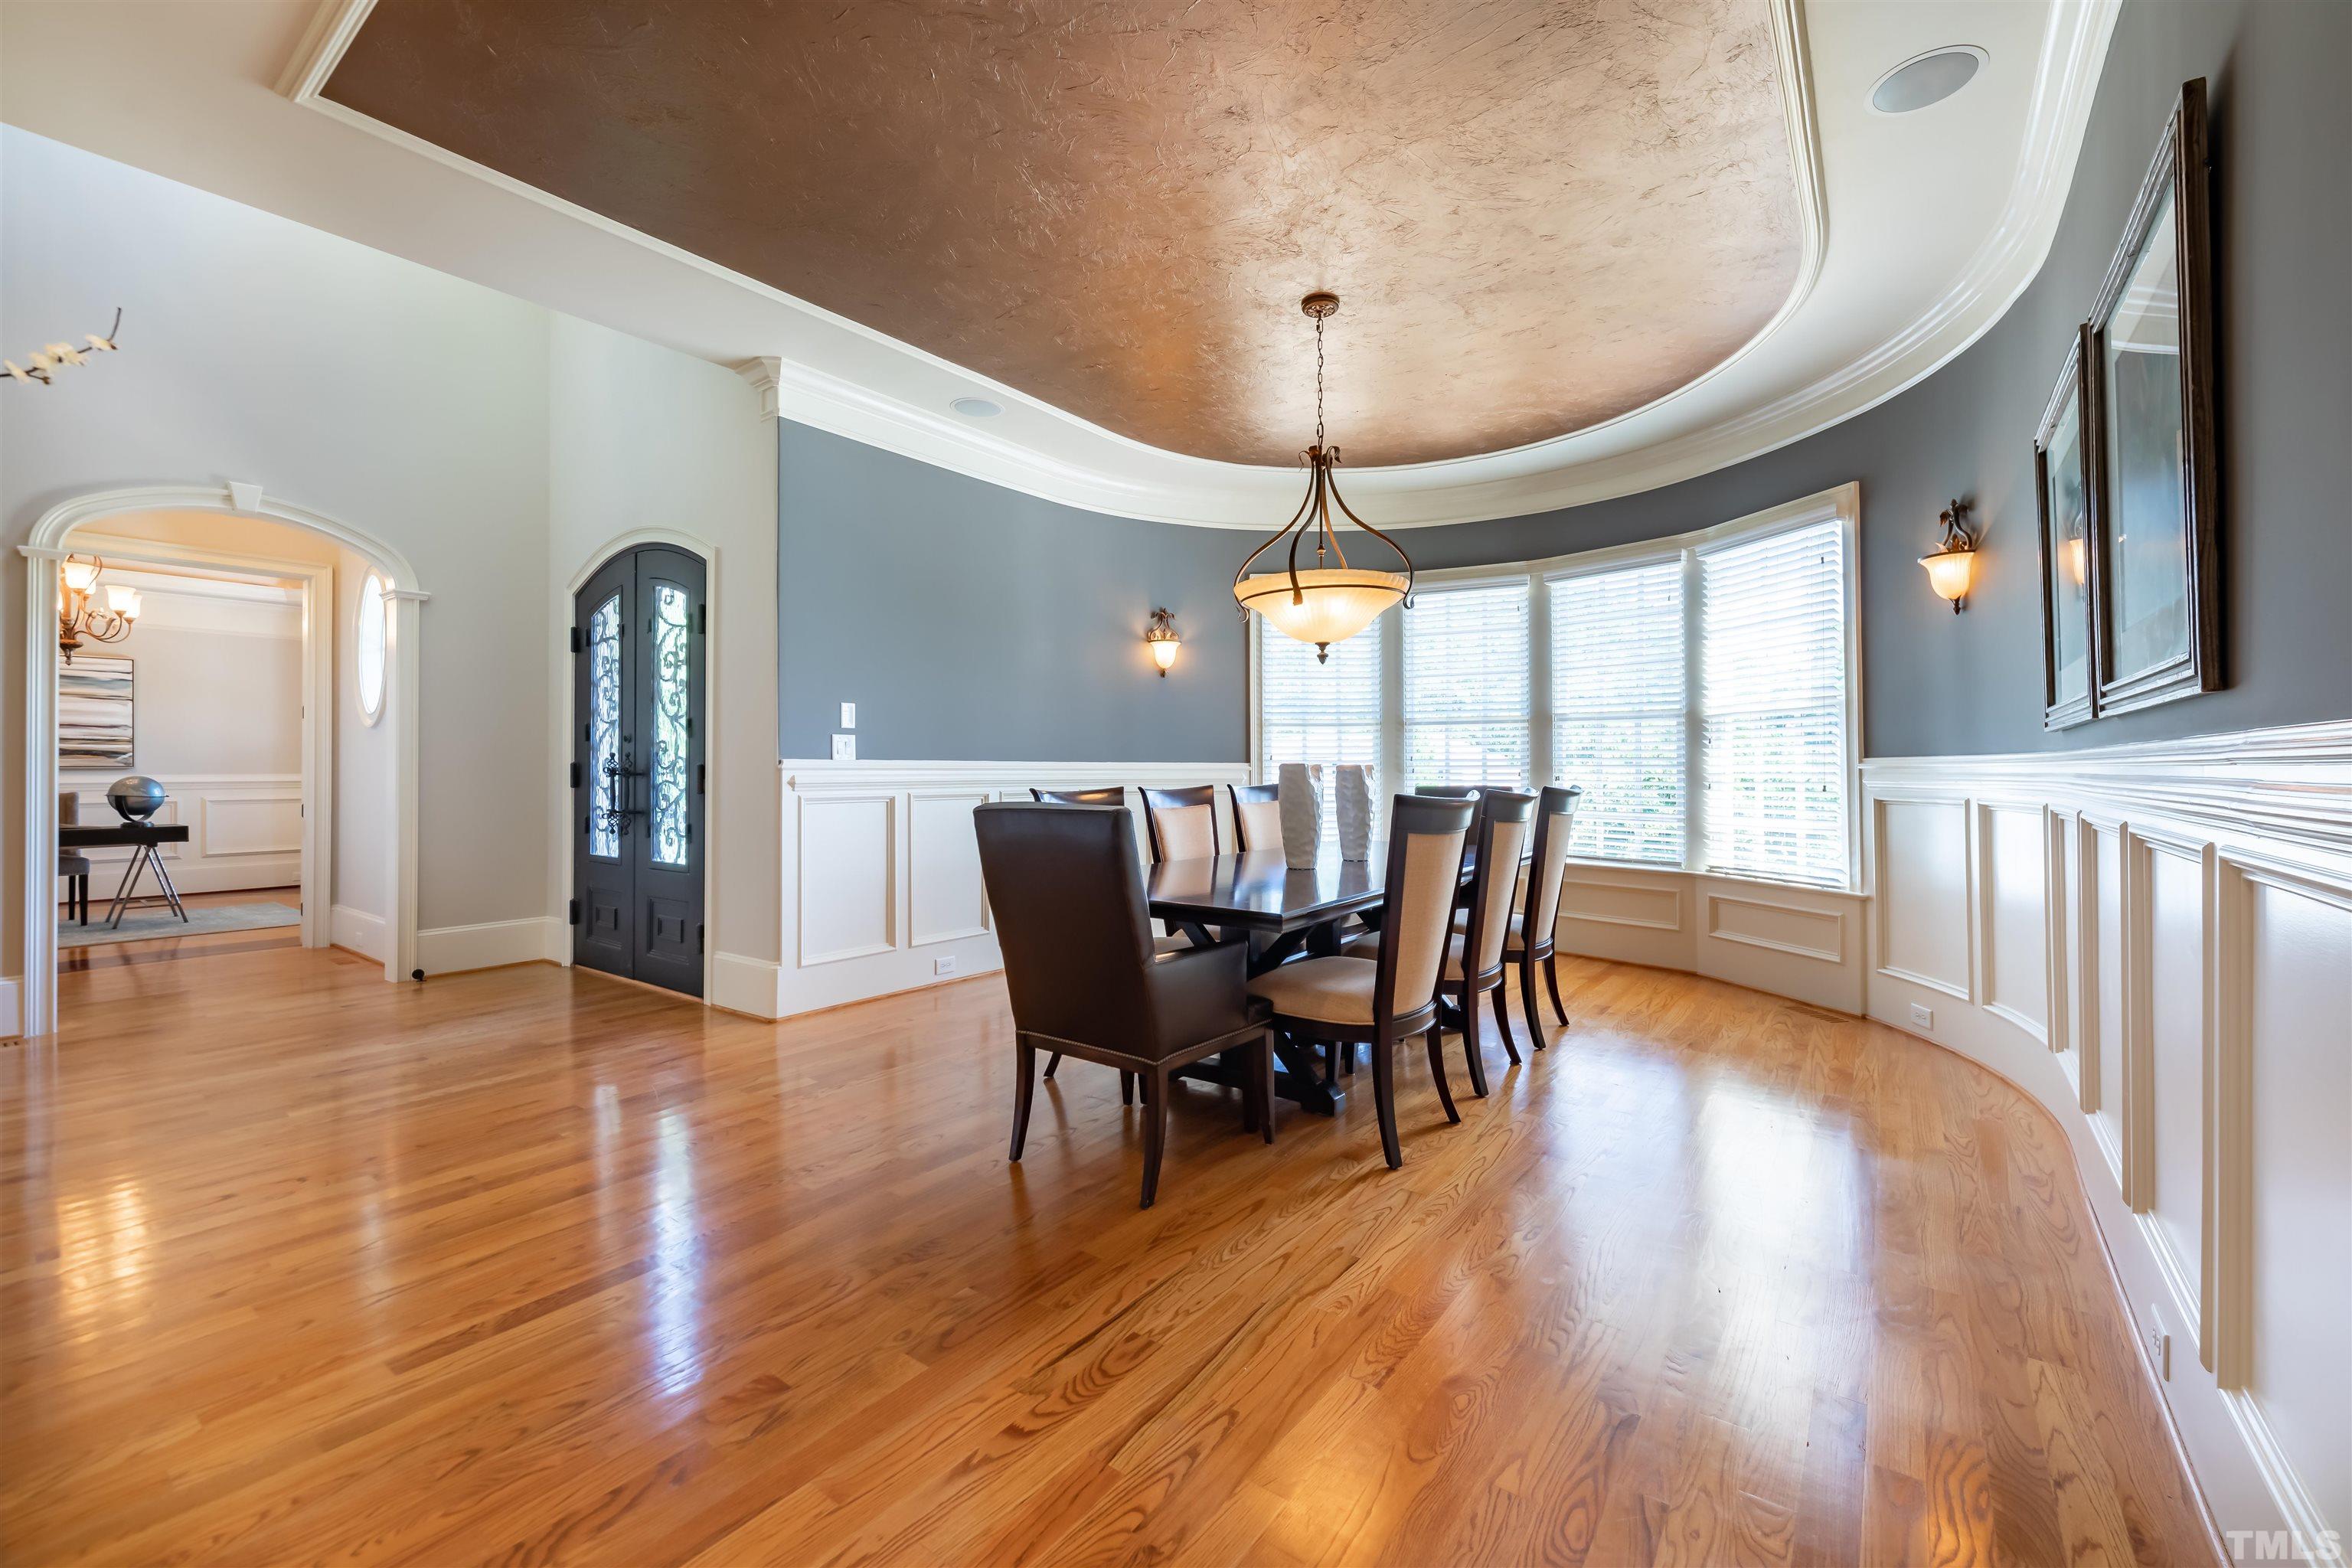 To the left of the foyer is the banquet sized dining room, perfect for large dinner parties.  As you can see, the ceiling trim follows the curved wall.  Lots of windows for natural light.  Wainscoting defines the walls.